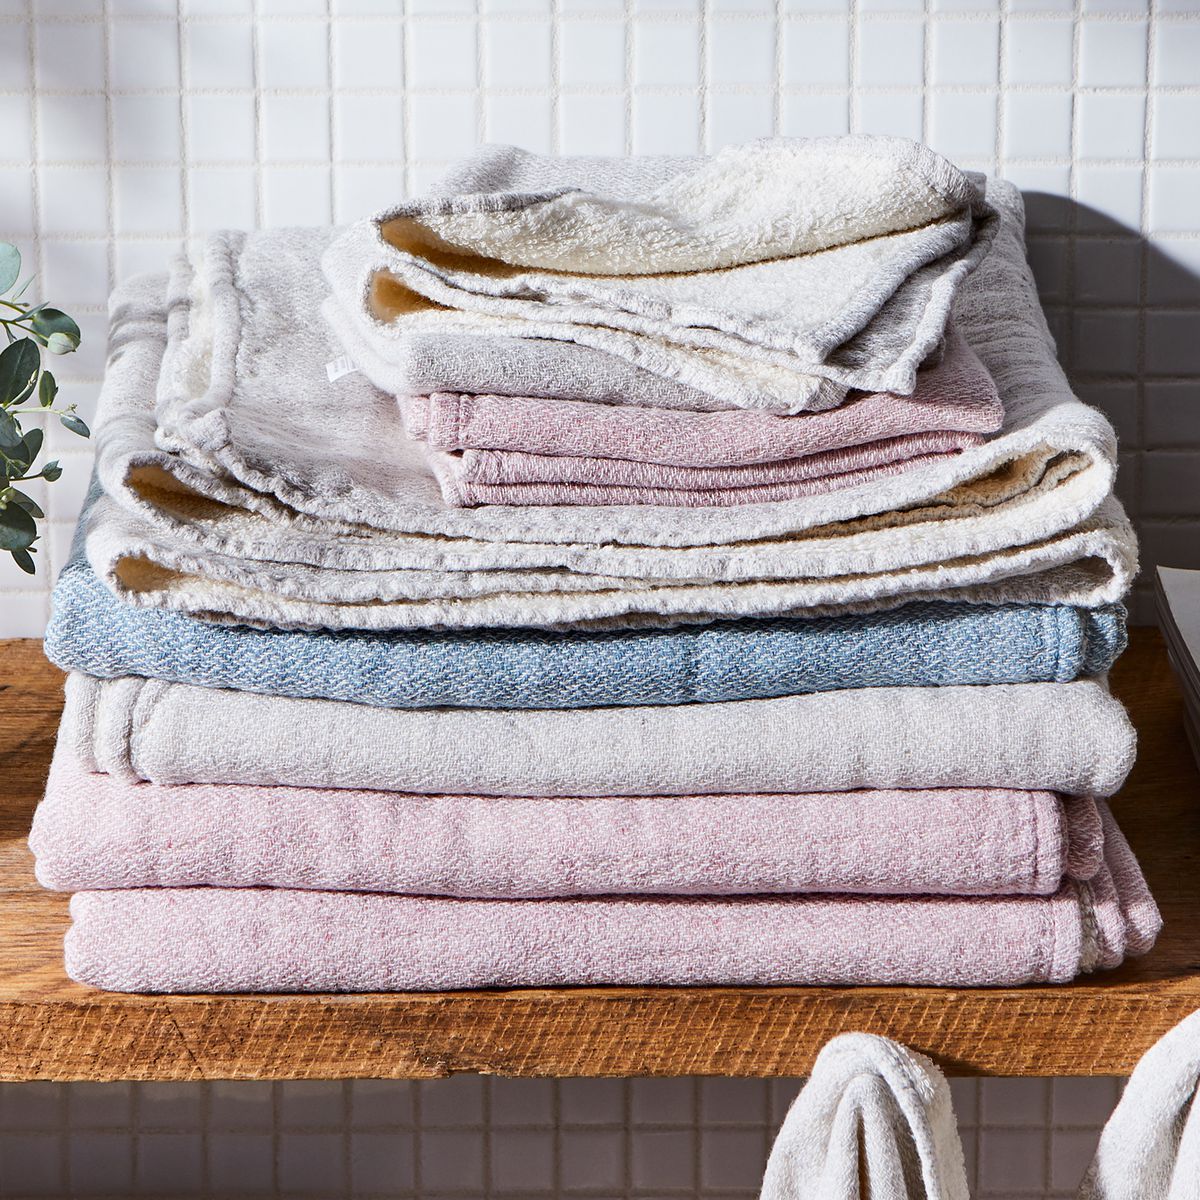 RiLEY Home Spa Towel Collection